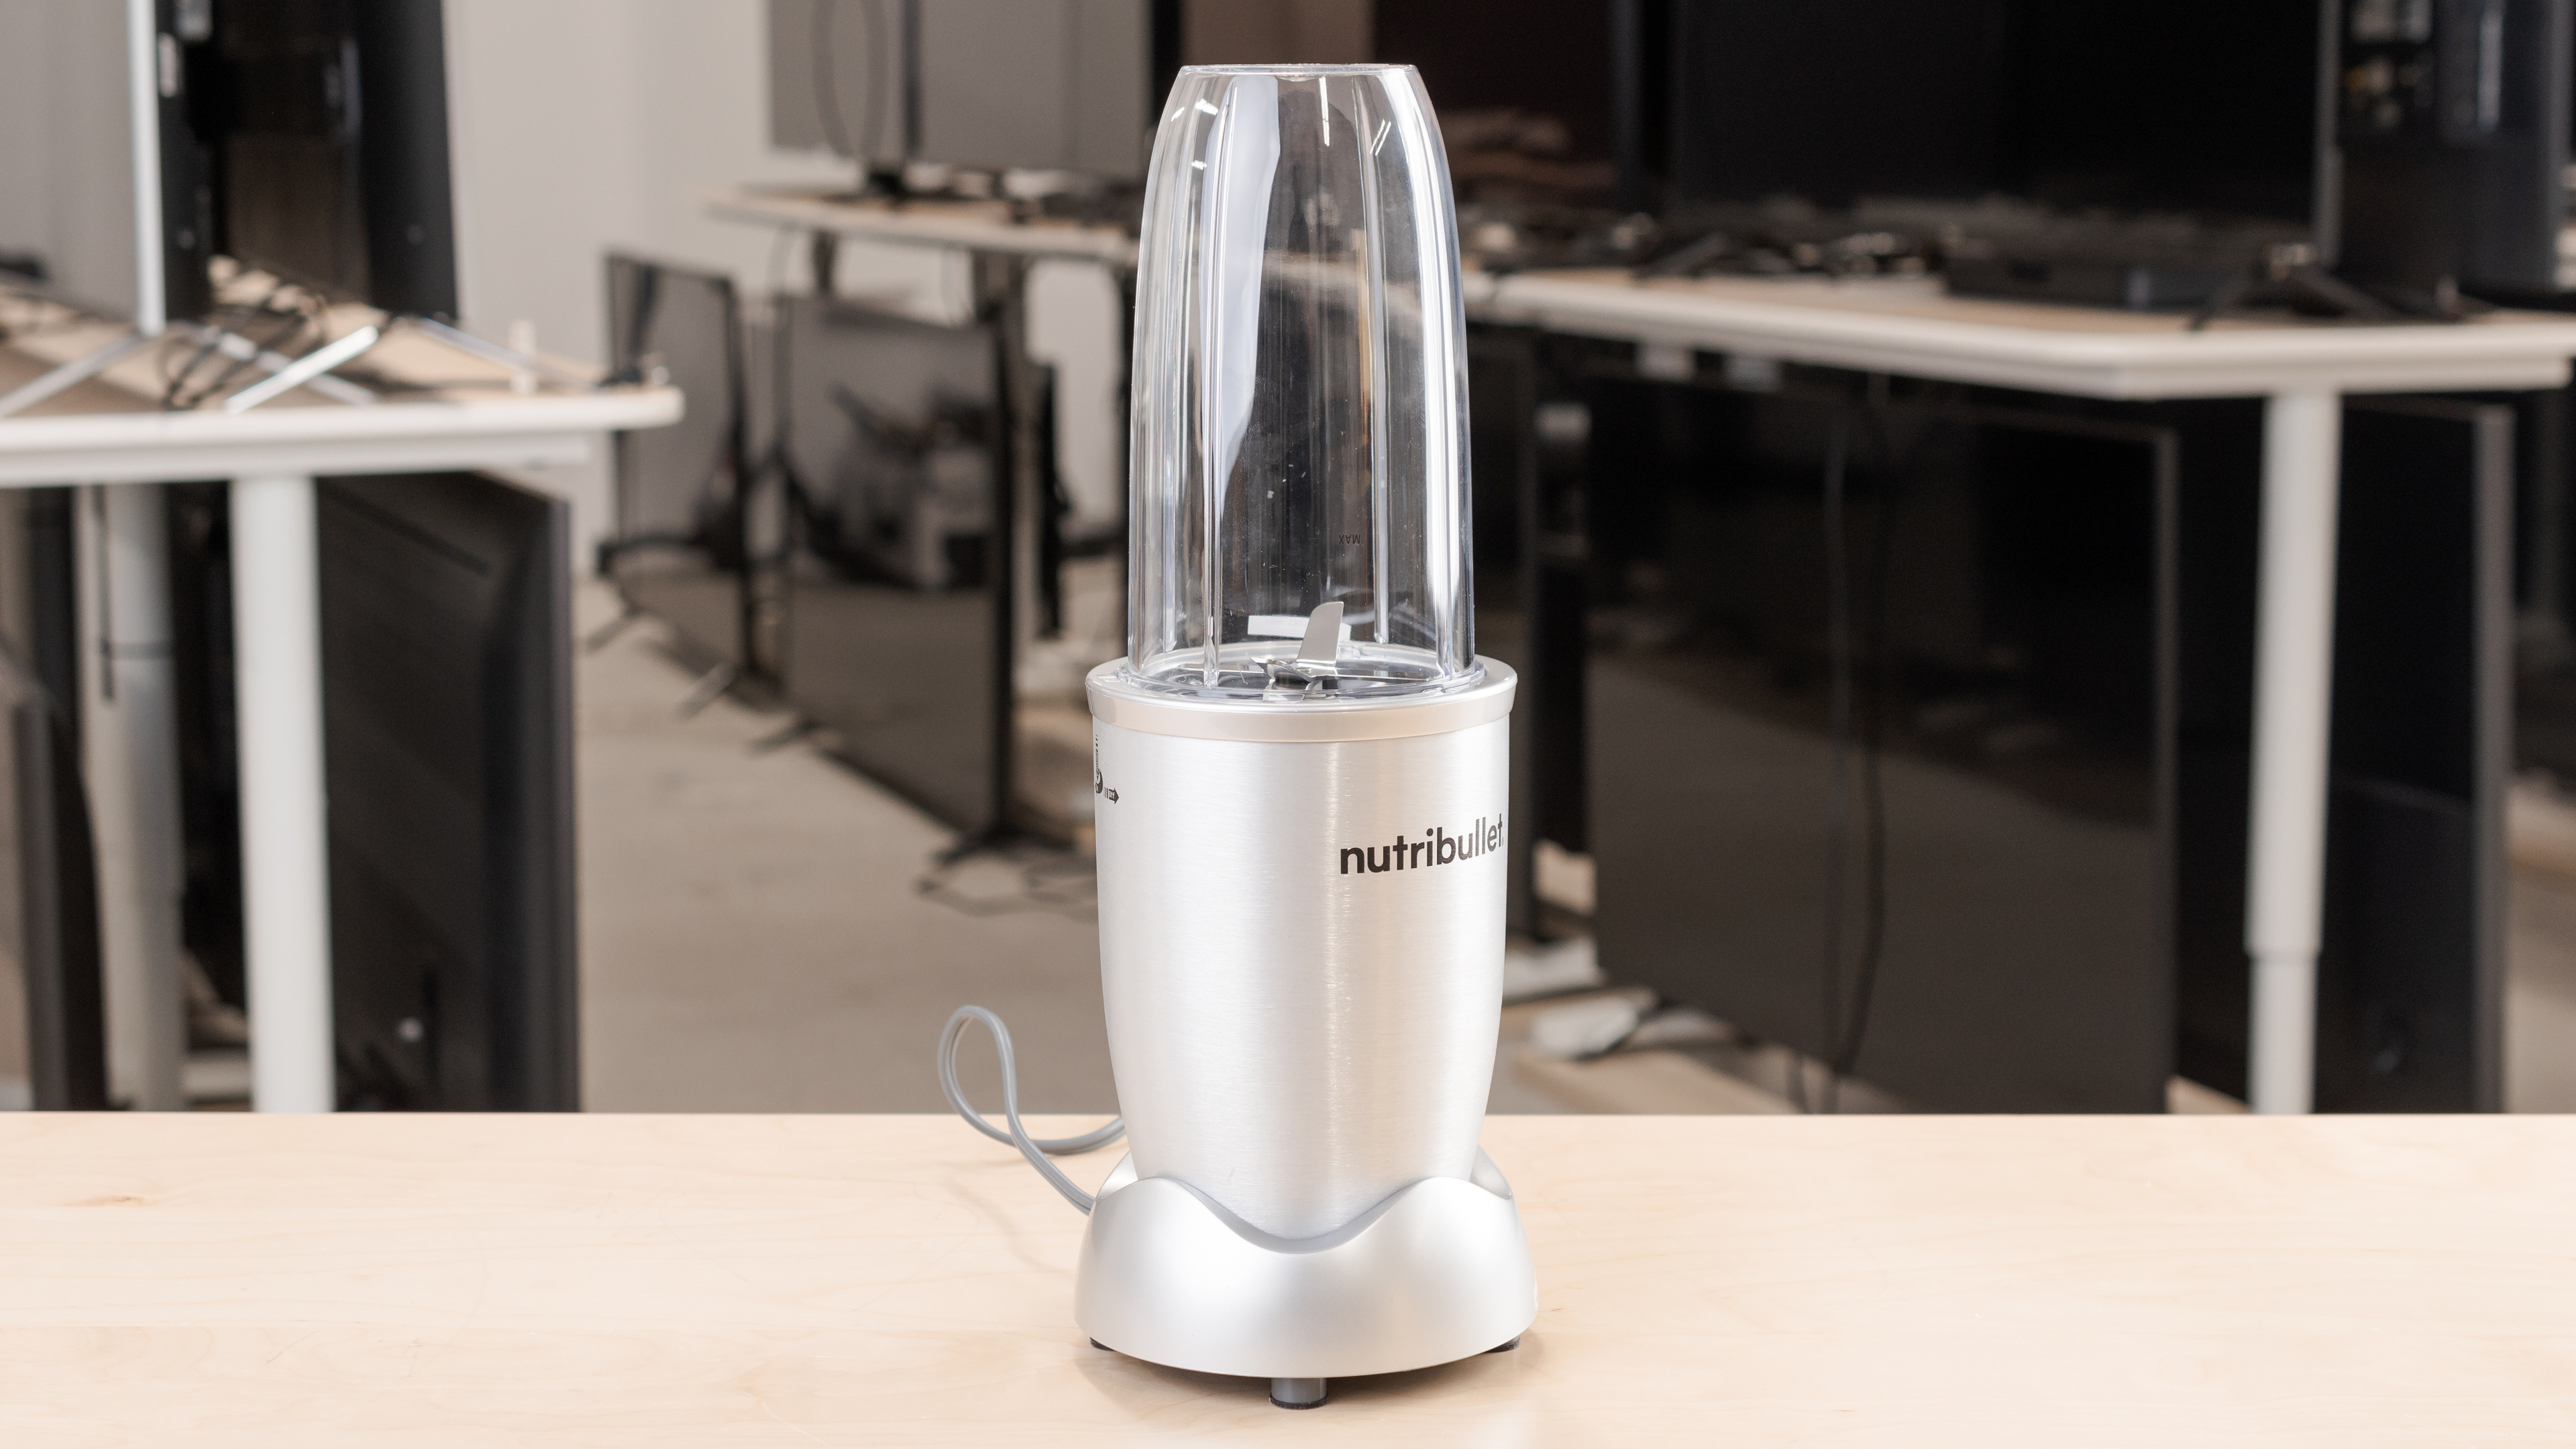 https://www.rtings.com/assets/products/McgDWn56/nutribullet-pro-900/design-large.jpg